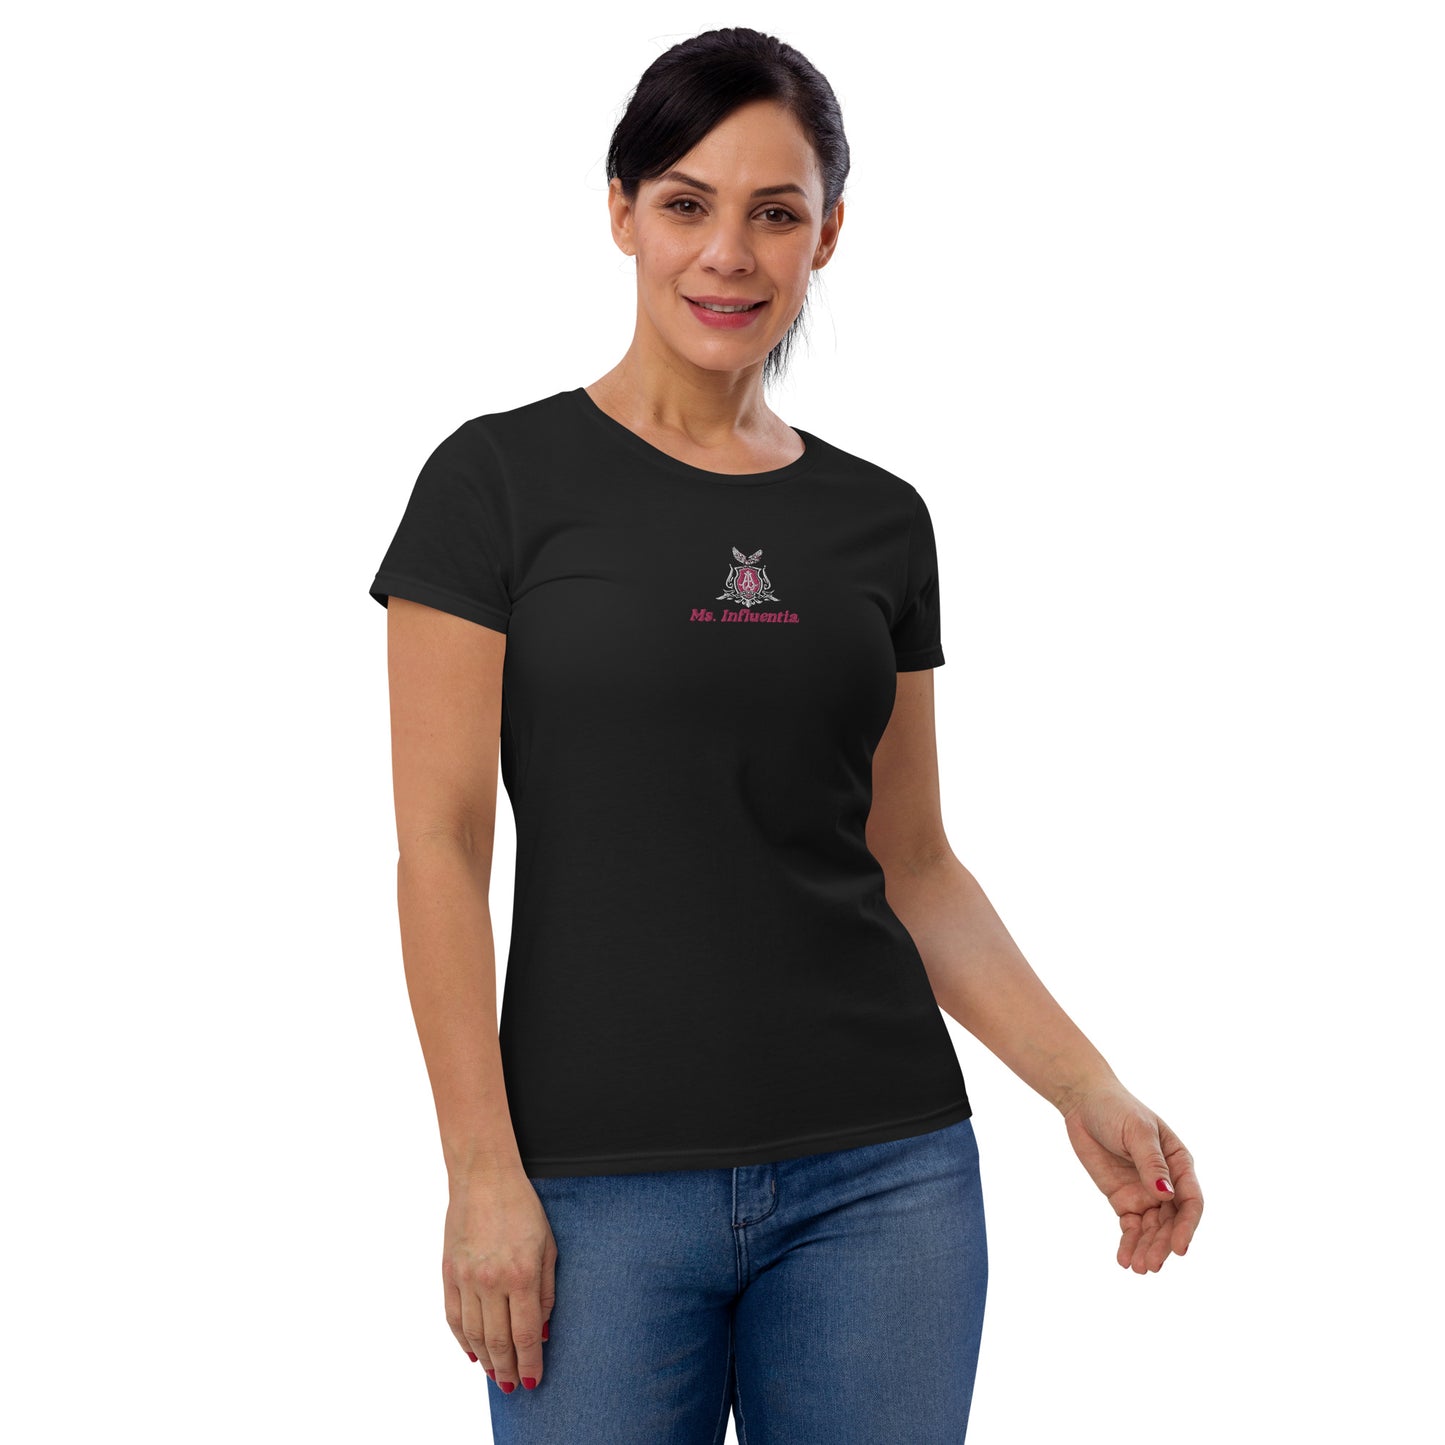 Ms. Influential Embroidered T-shirt